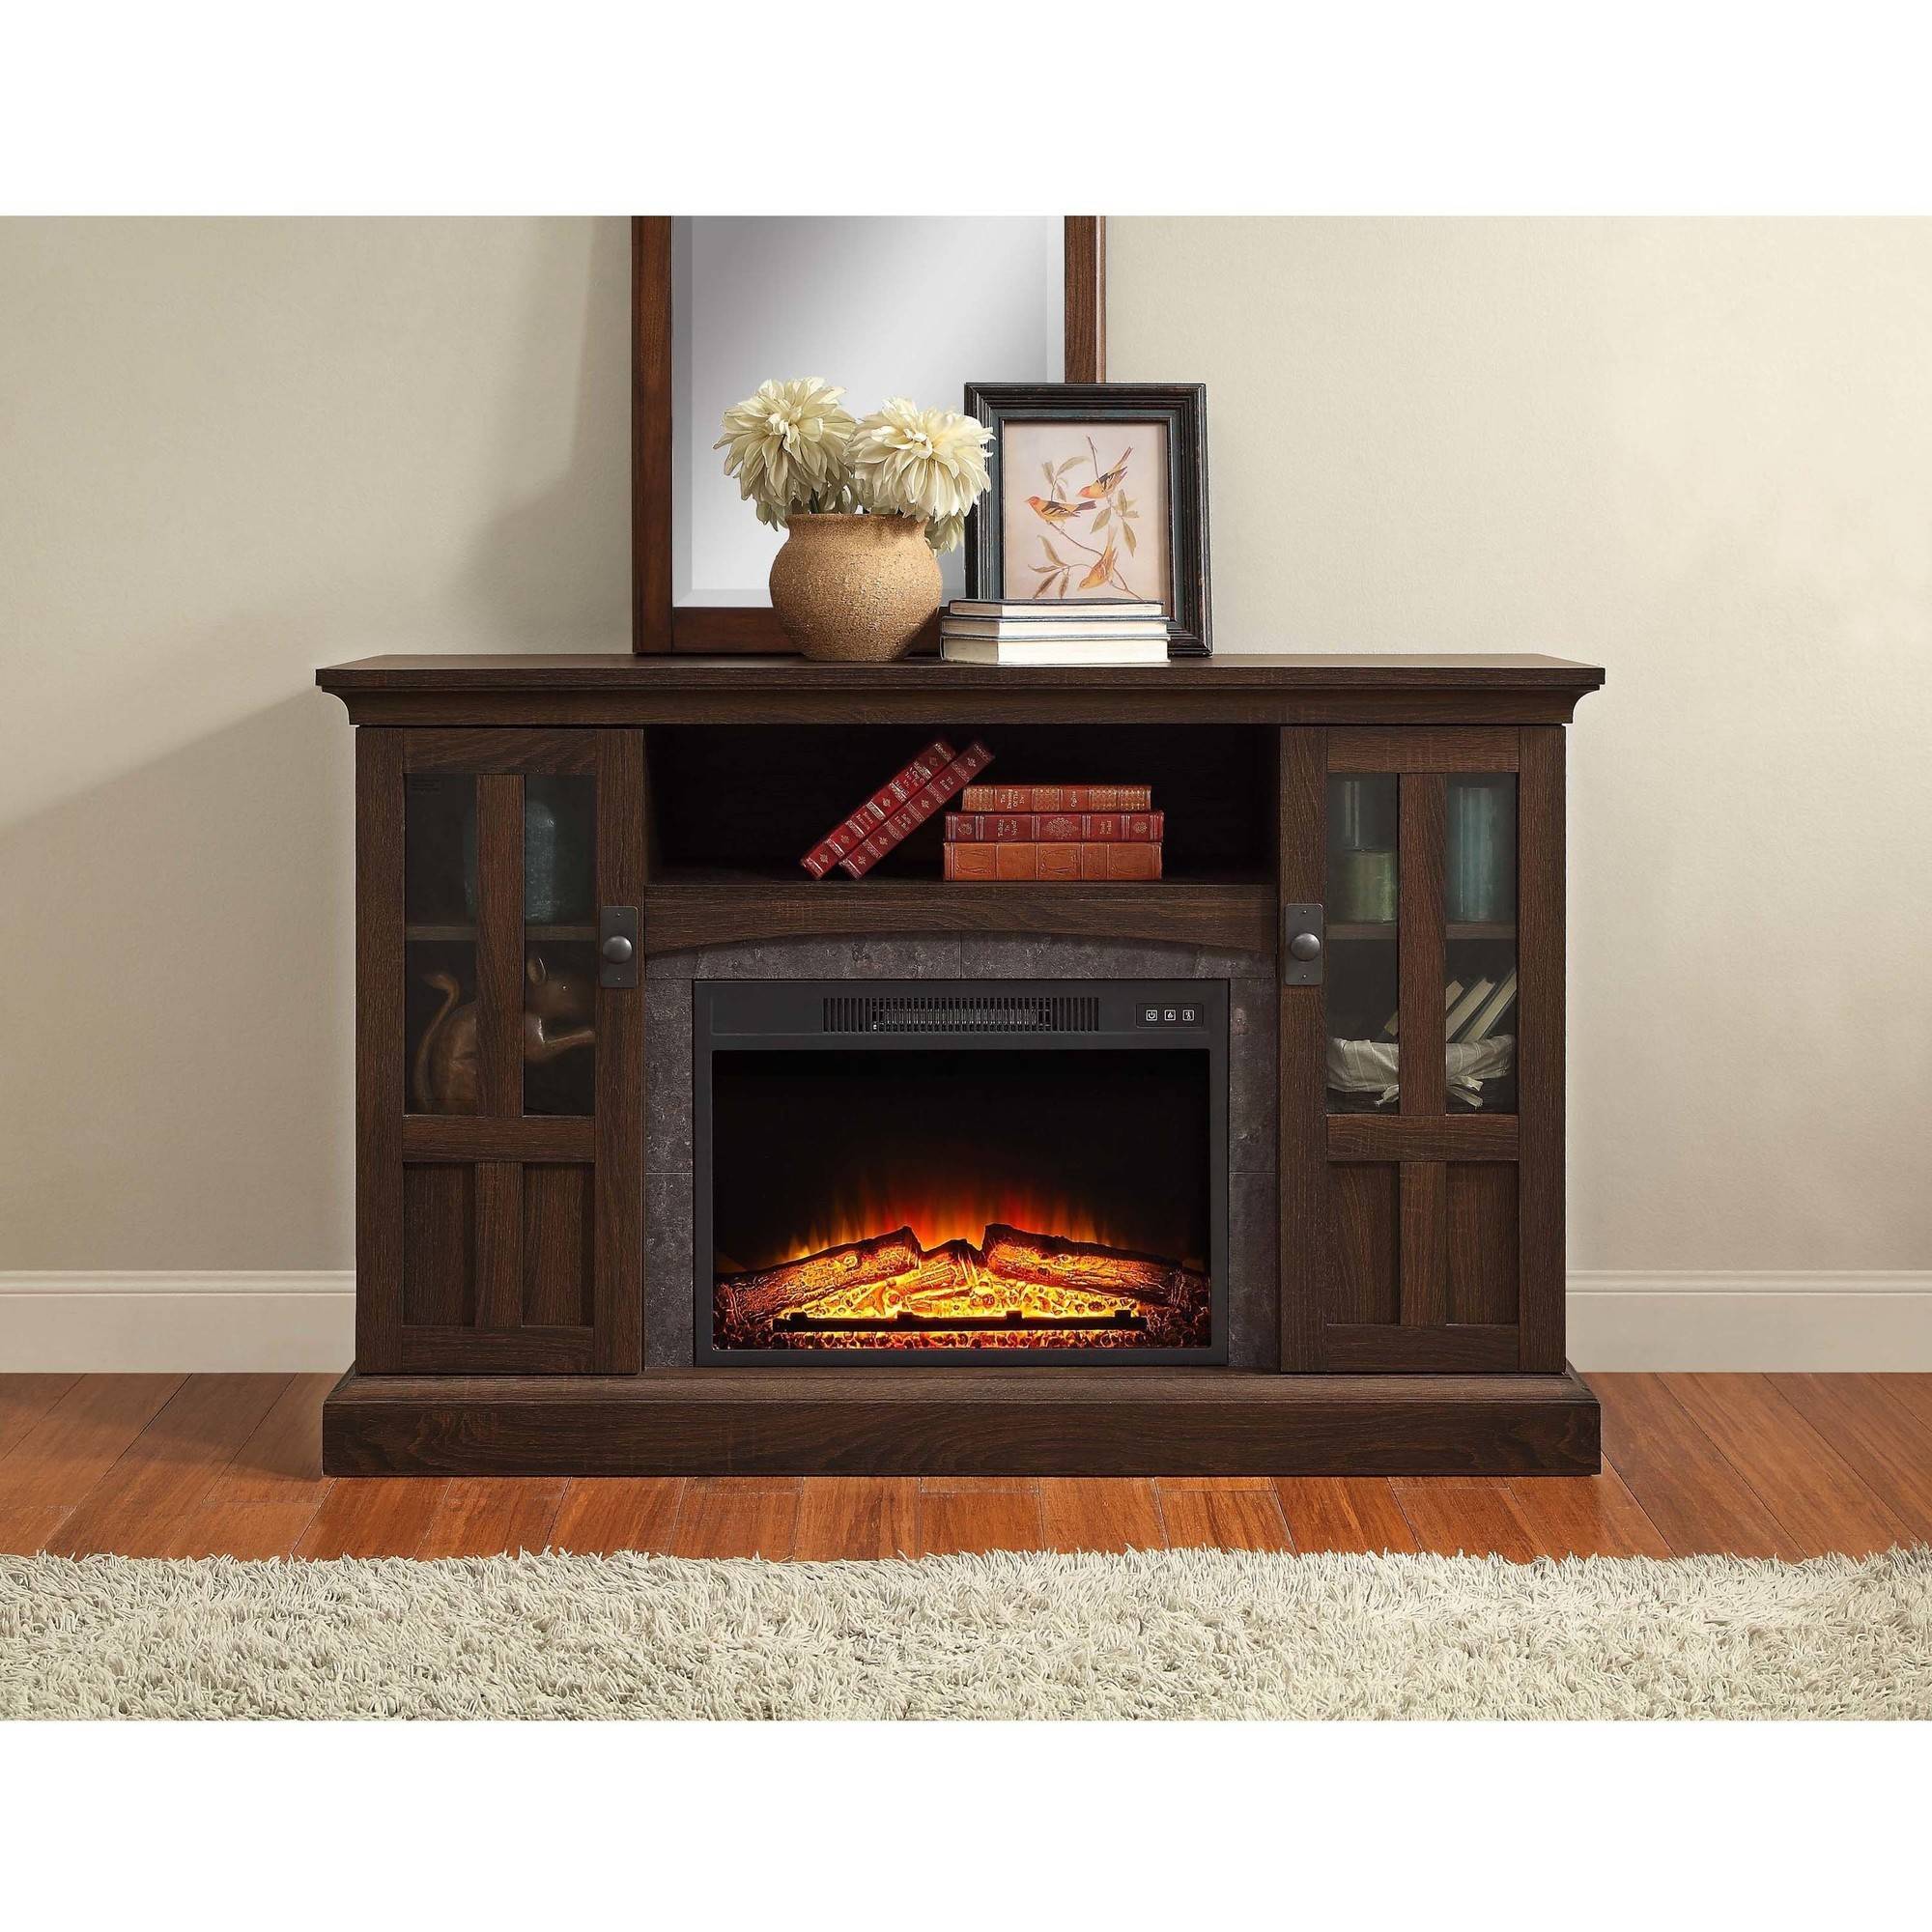 Walmart Electric Fireplace Tv Stand Elegant Whalen Media Fireplace Console for Tvs Up to 60" Brown ash